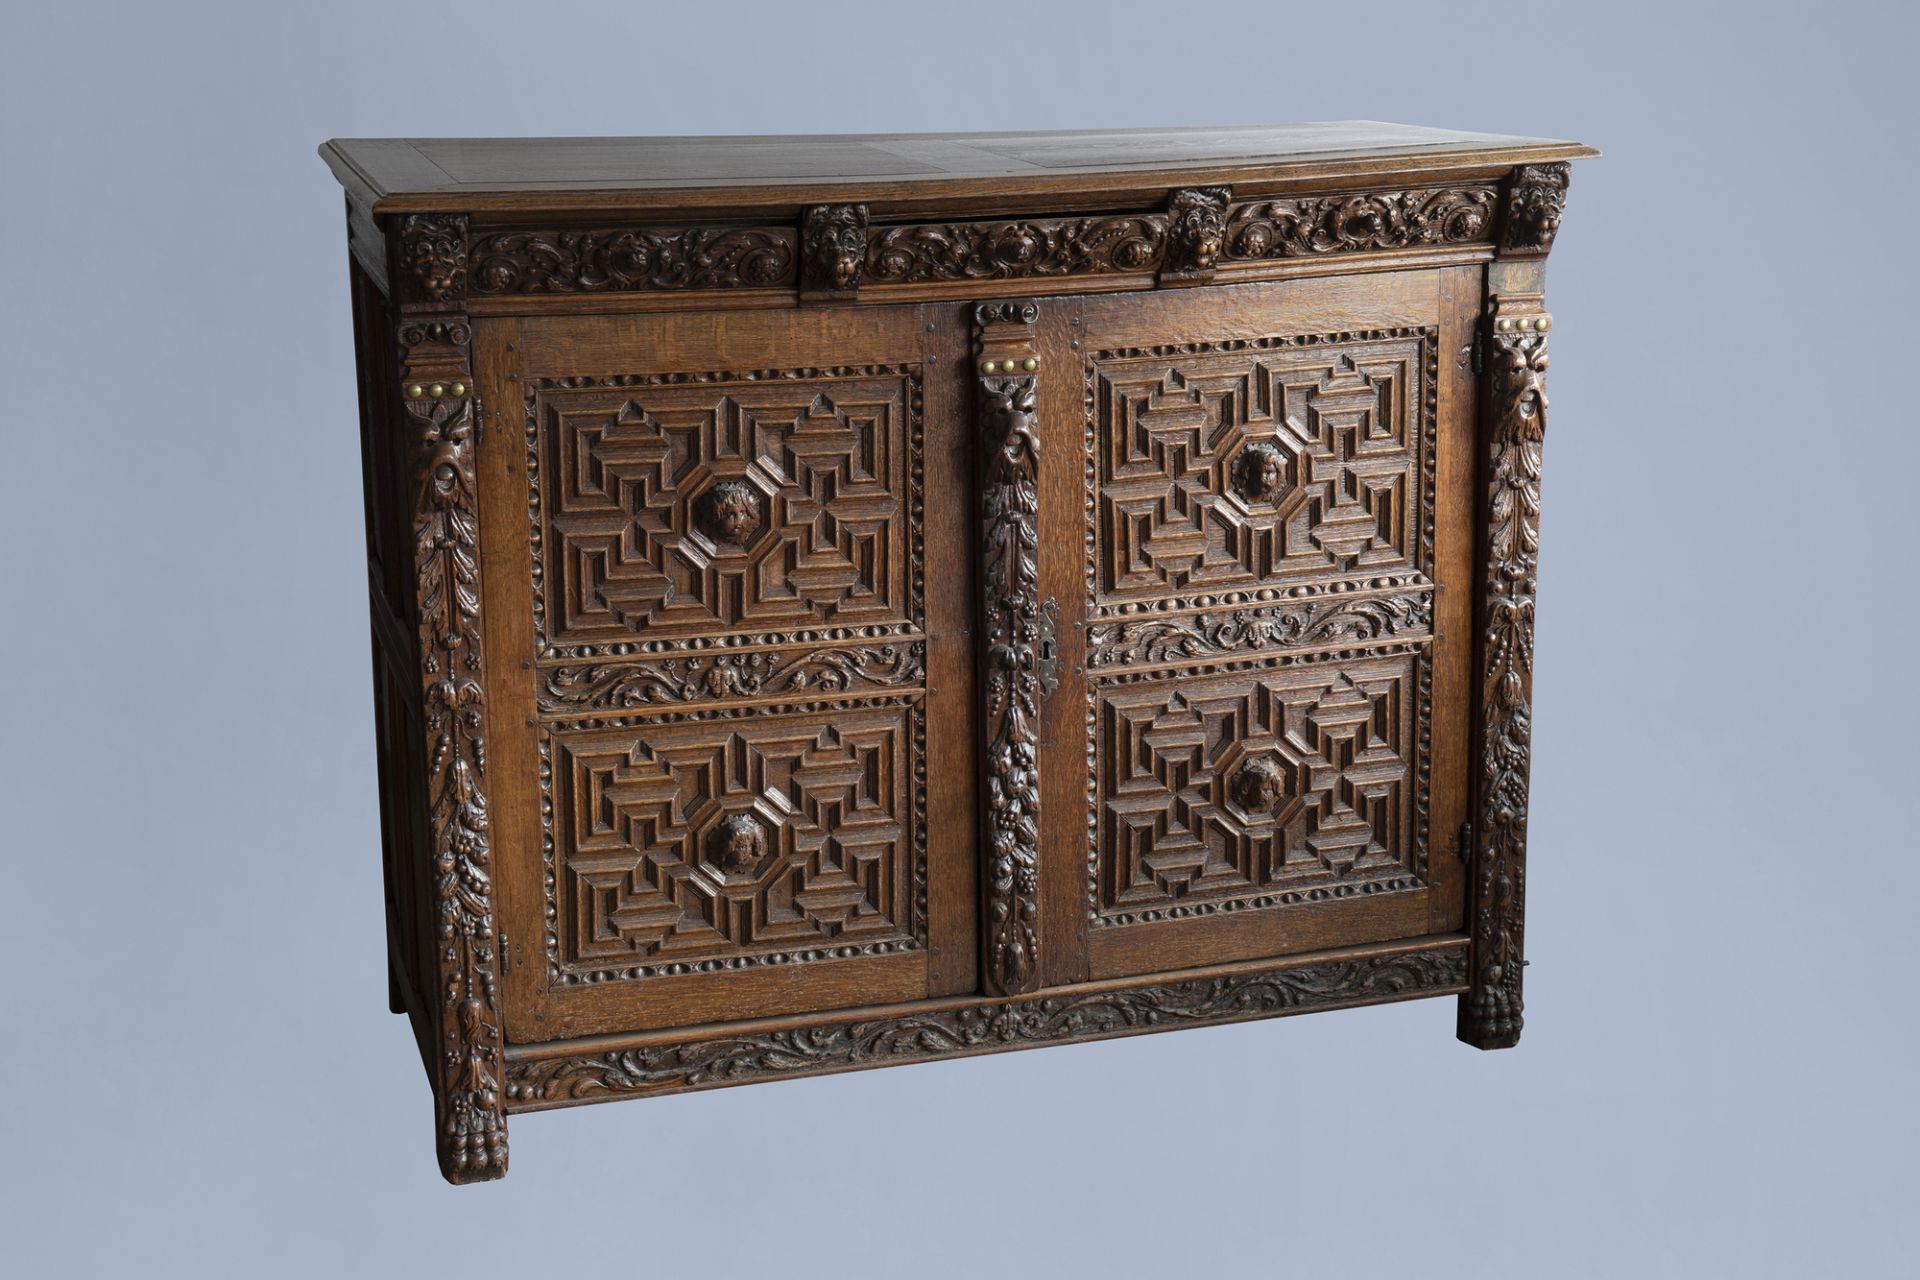 An oak wooden buffet dresser with floral design and lion heads, the Netherlands, 17th C. and later